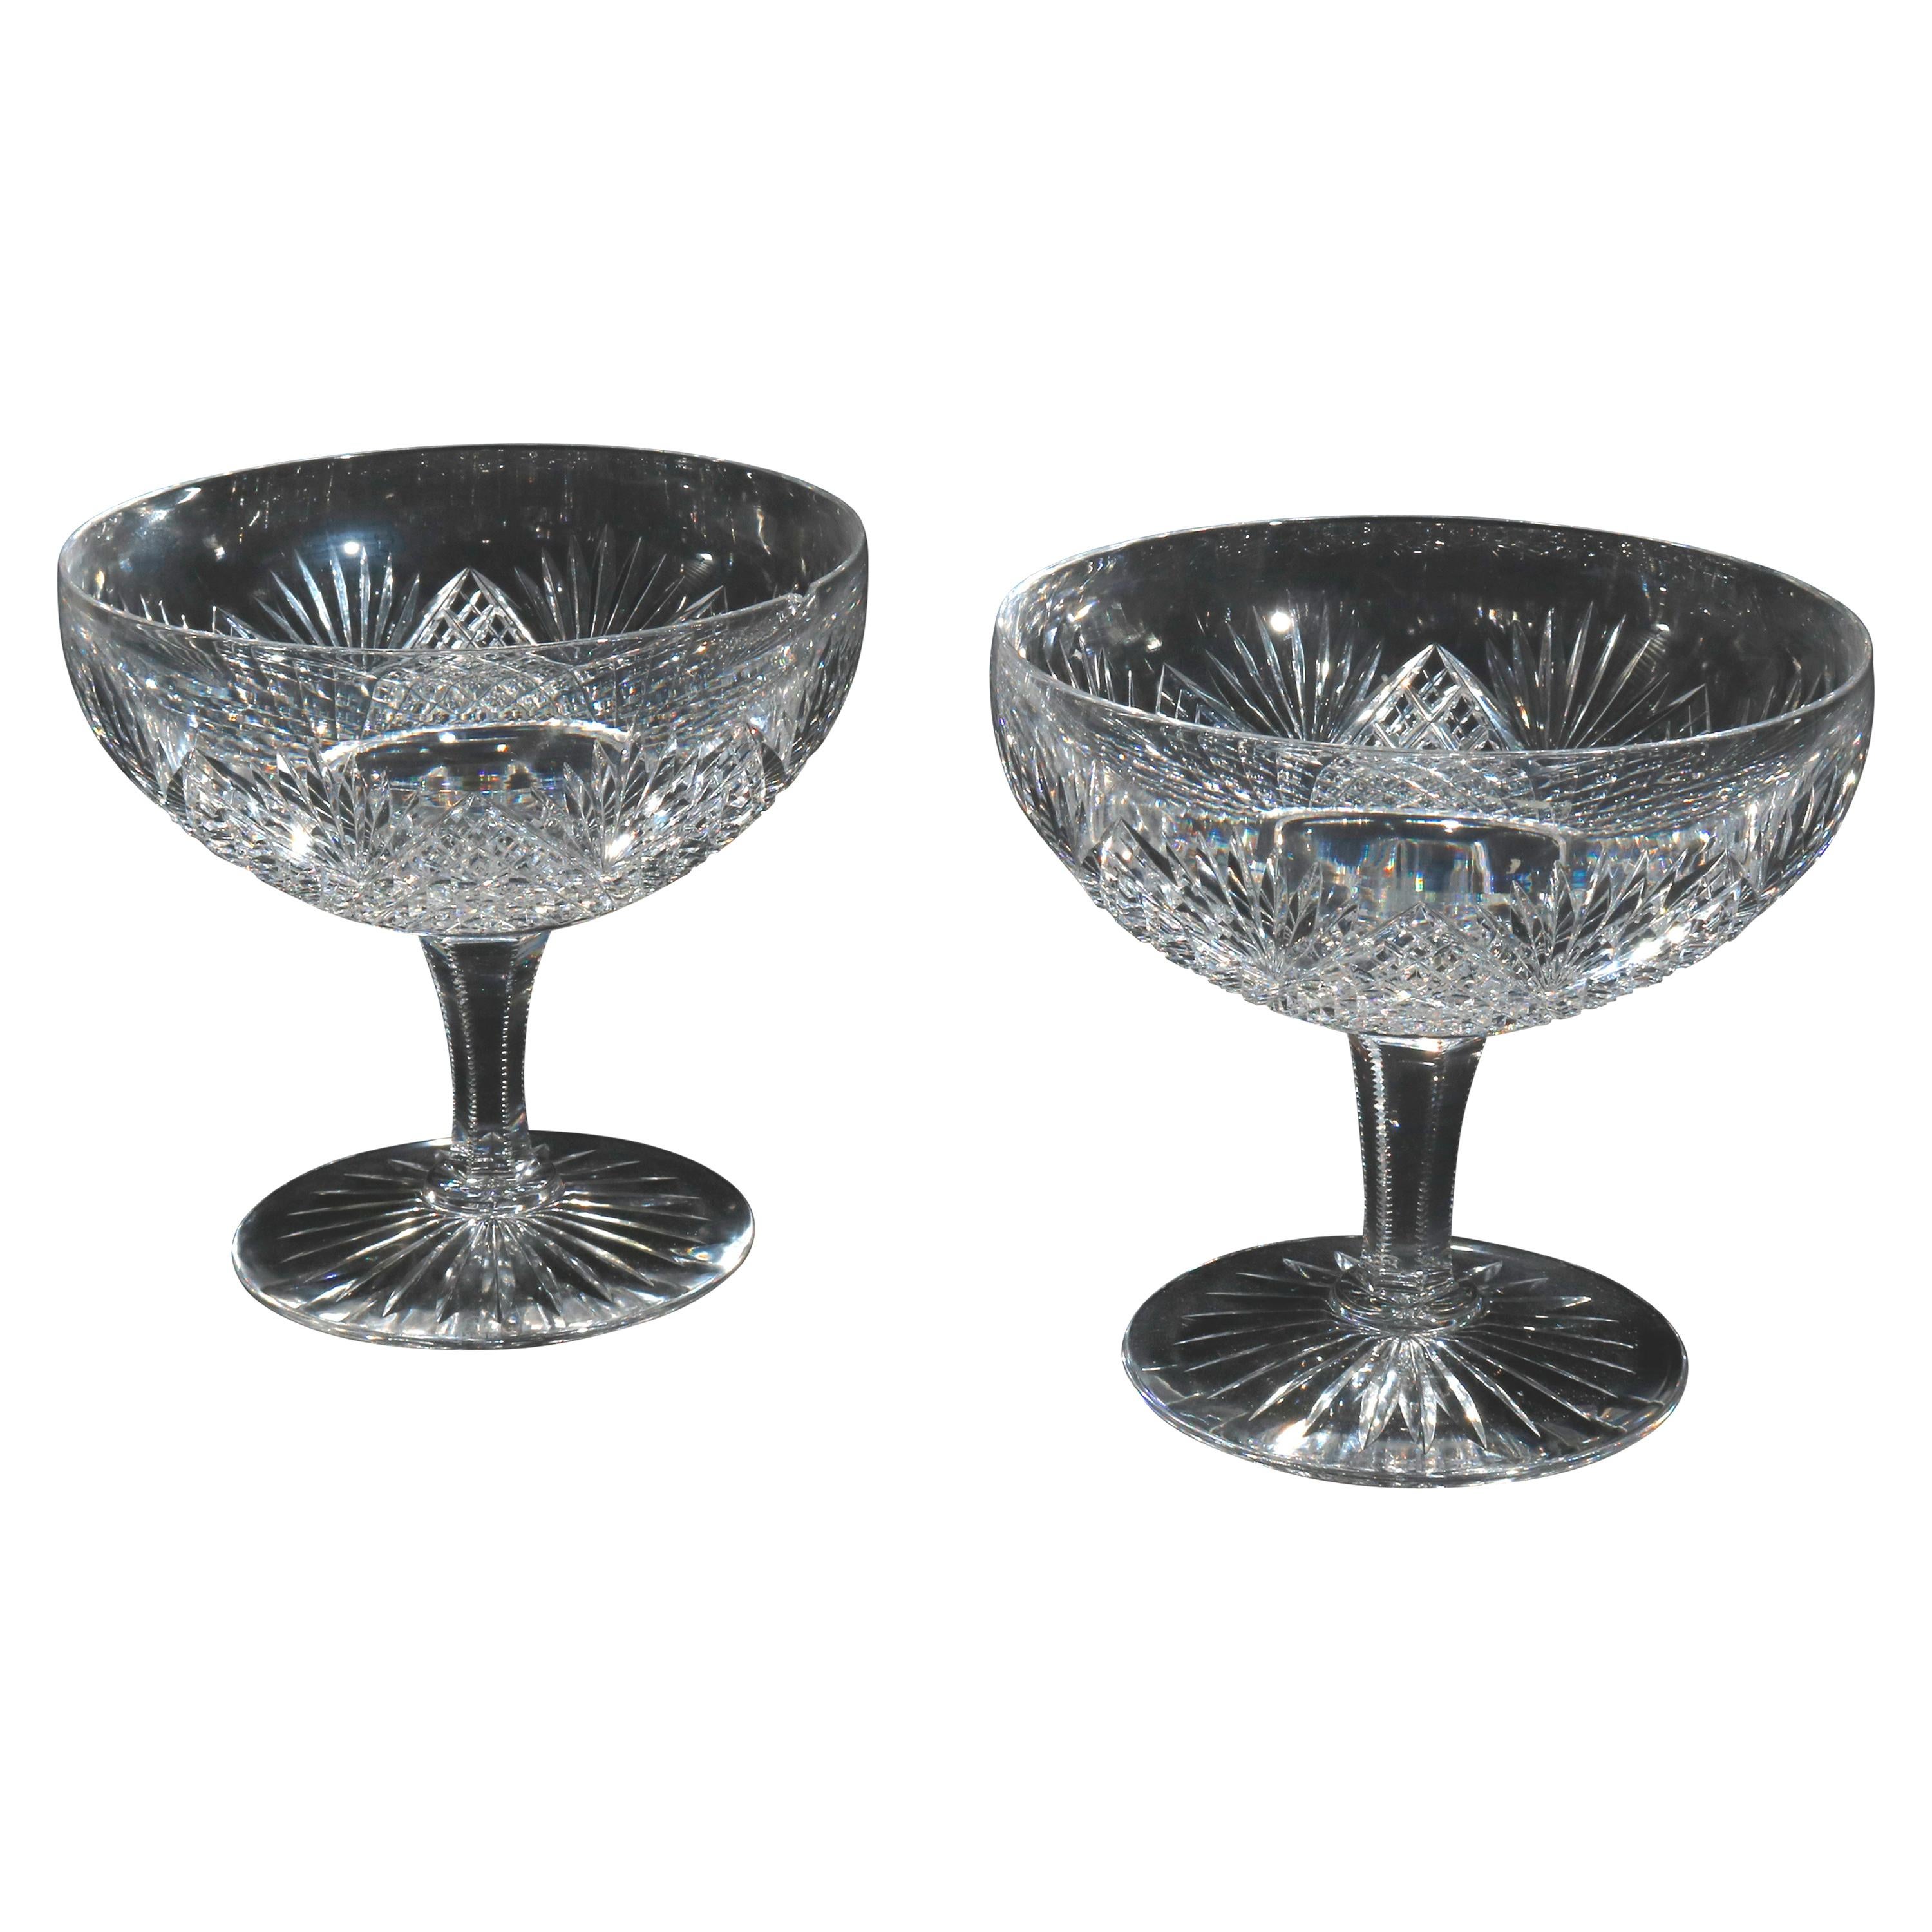 Pair of Hawkes American Brilliant Cut Glass Dessert Compotes, 20th Century